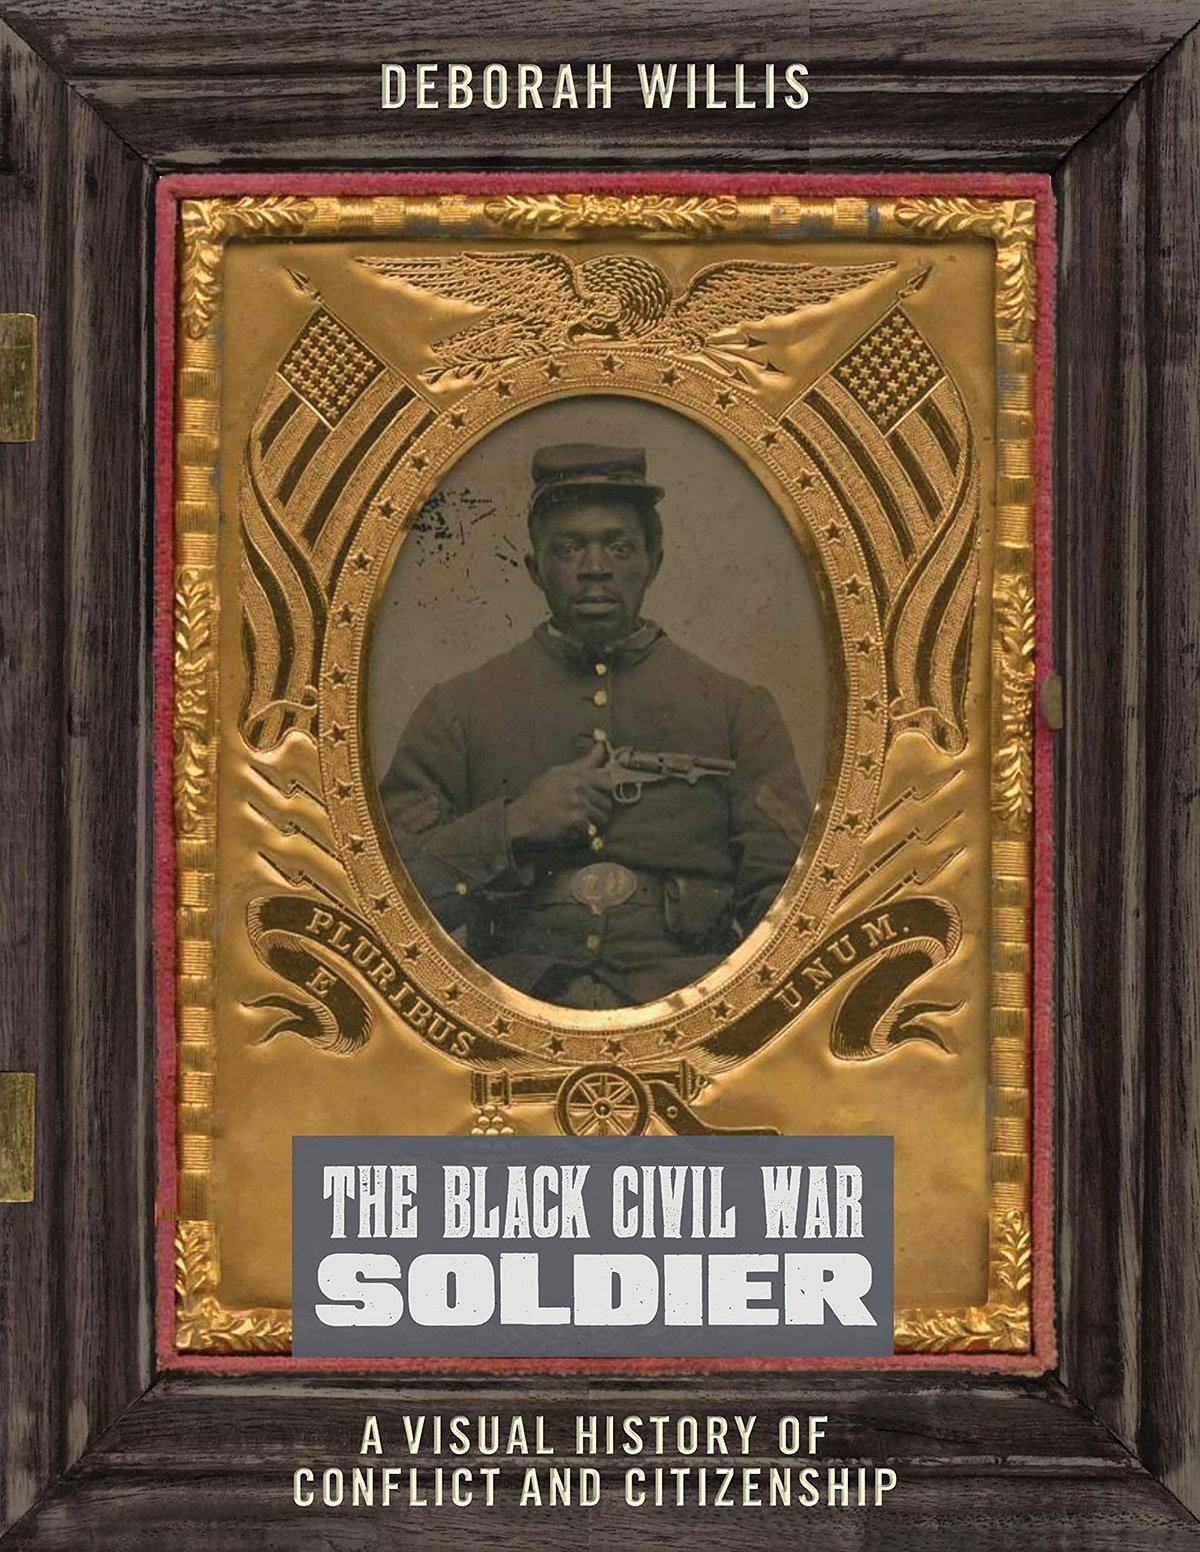 An image of the book cover of "The Black Civil War Solider" by Dr. Deborah Willis